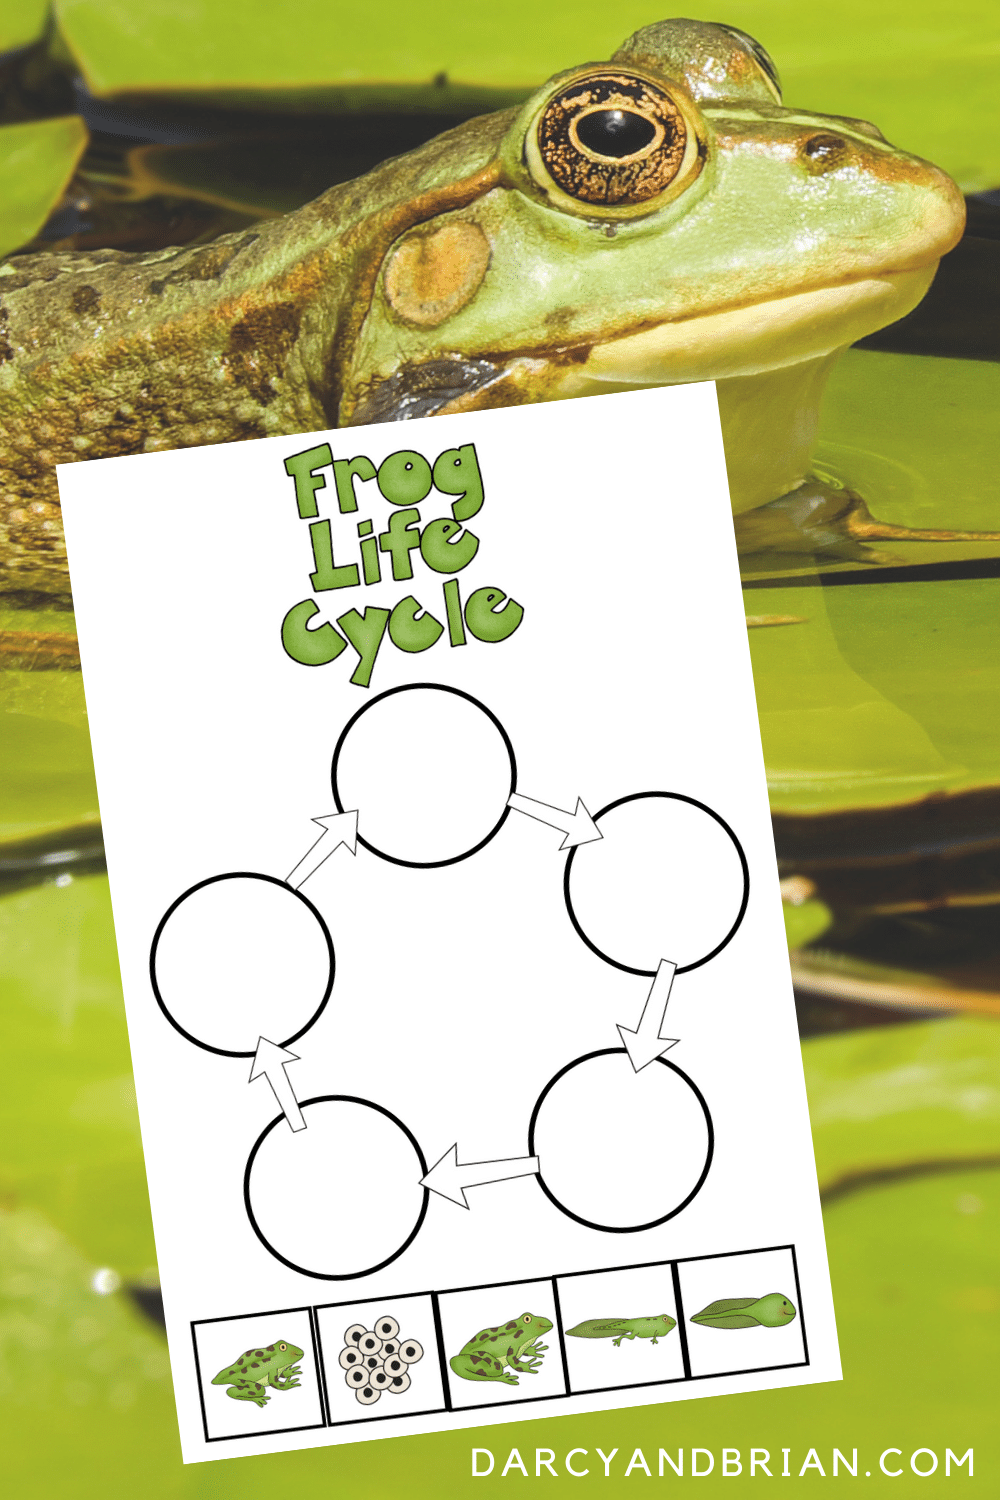 Frog Life Cycle Printable and Activities For Hands-on Science Lessons With Regard To Frogs Life Cycle Worksheet